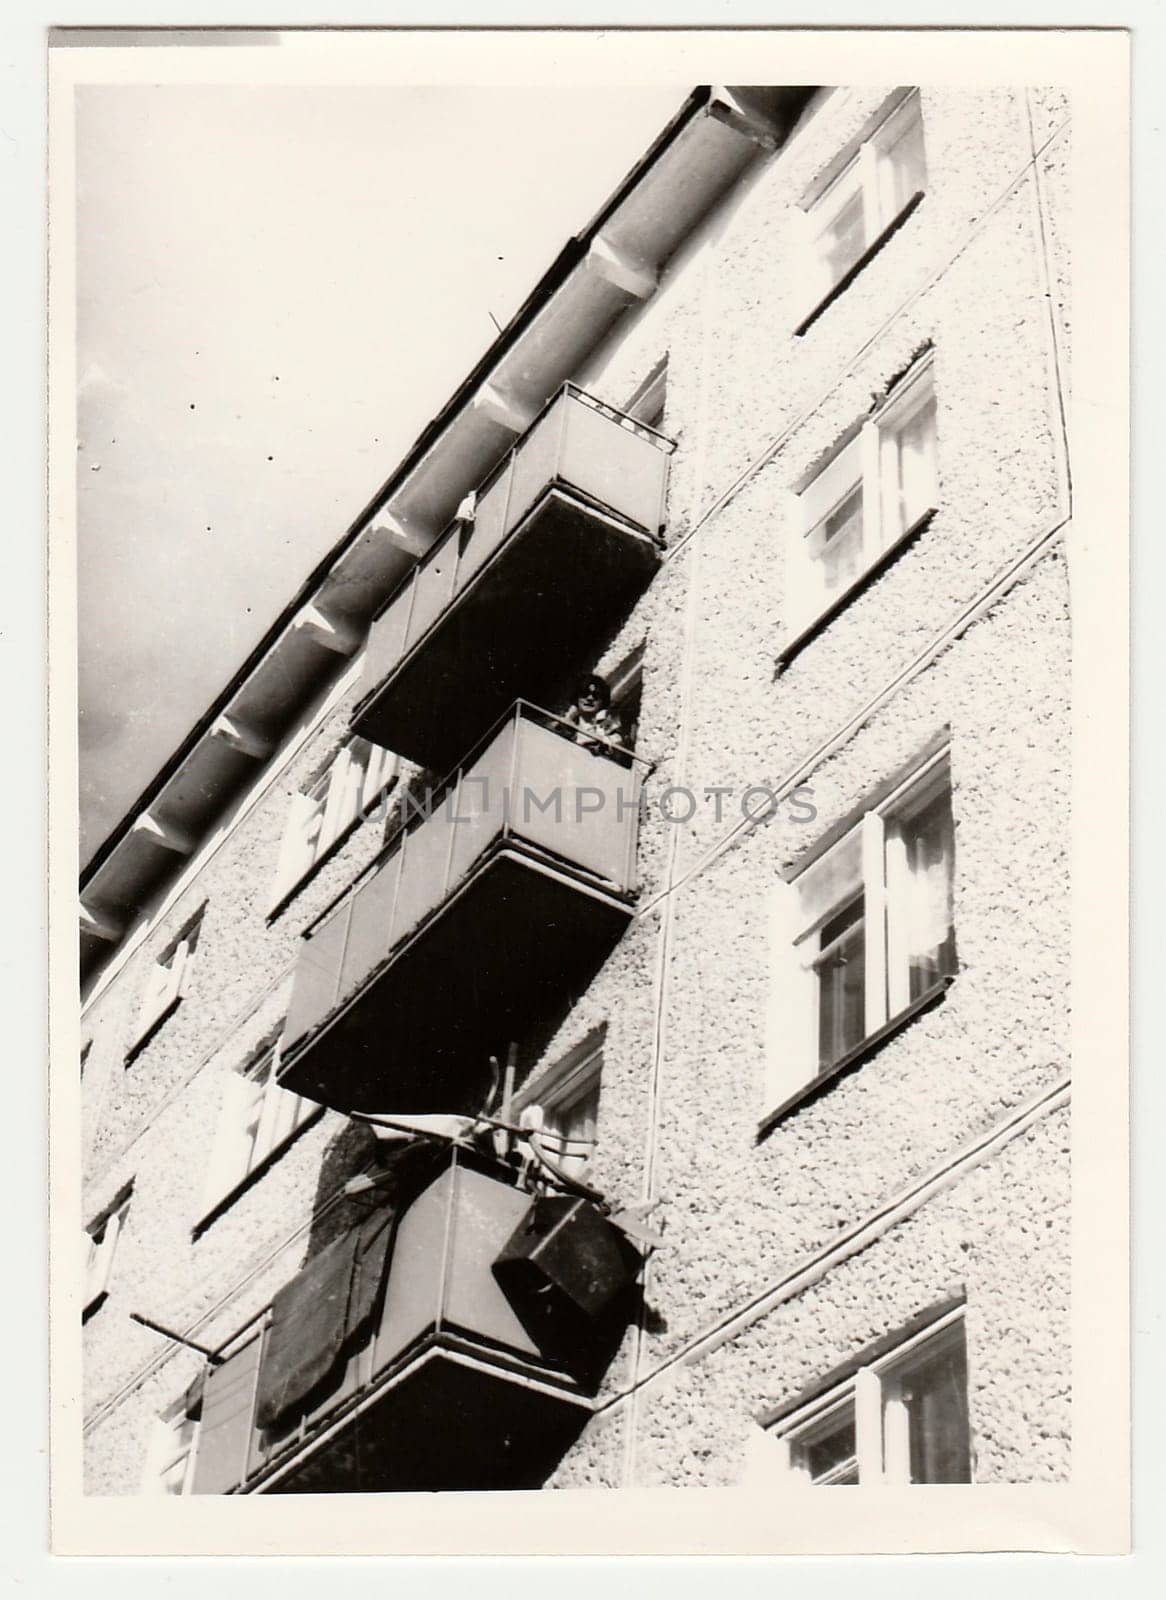 USSR - CIRCA 1980s: Vintage photo shows close-up on block of flats in USSR.